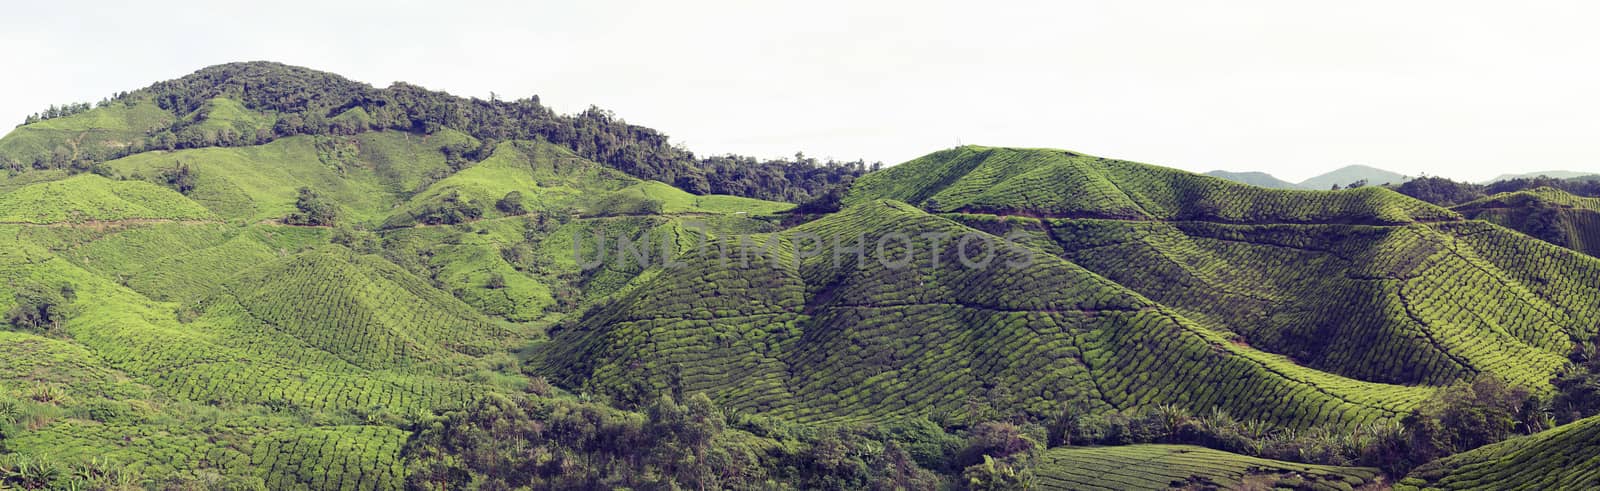 Panorama of tea plantations in Cameron Highlands, Malaysia. Green hills landscape